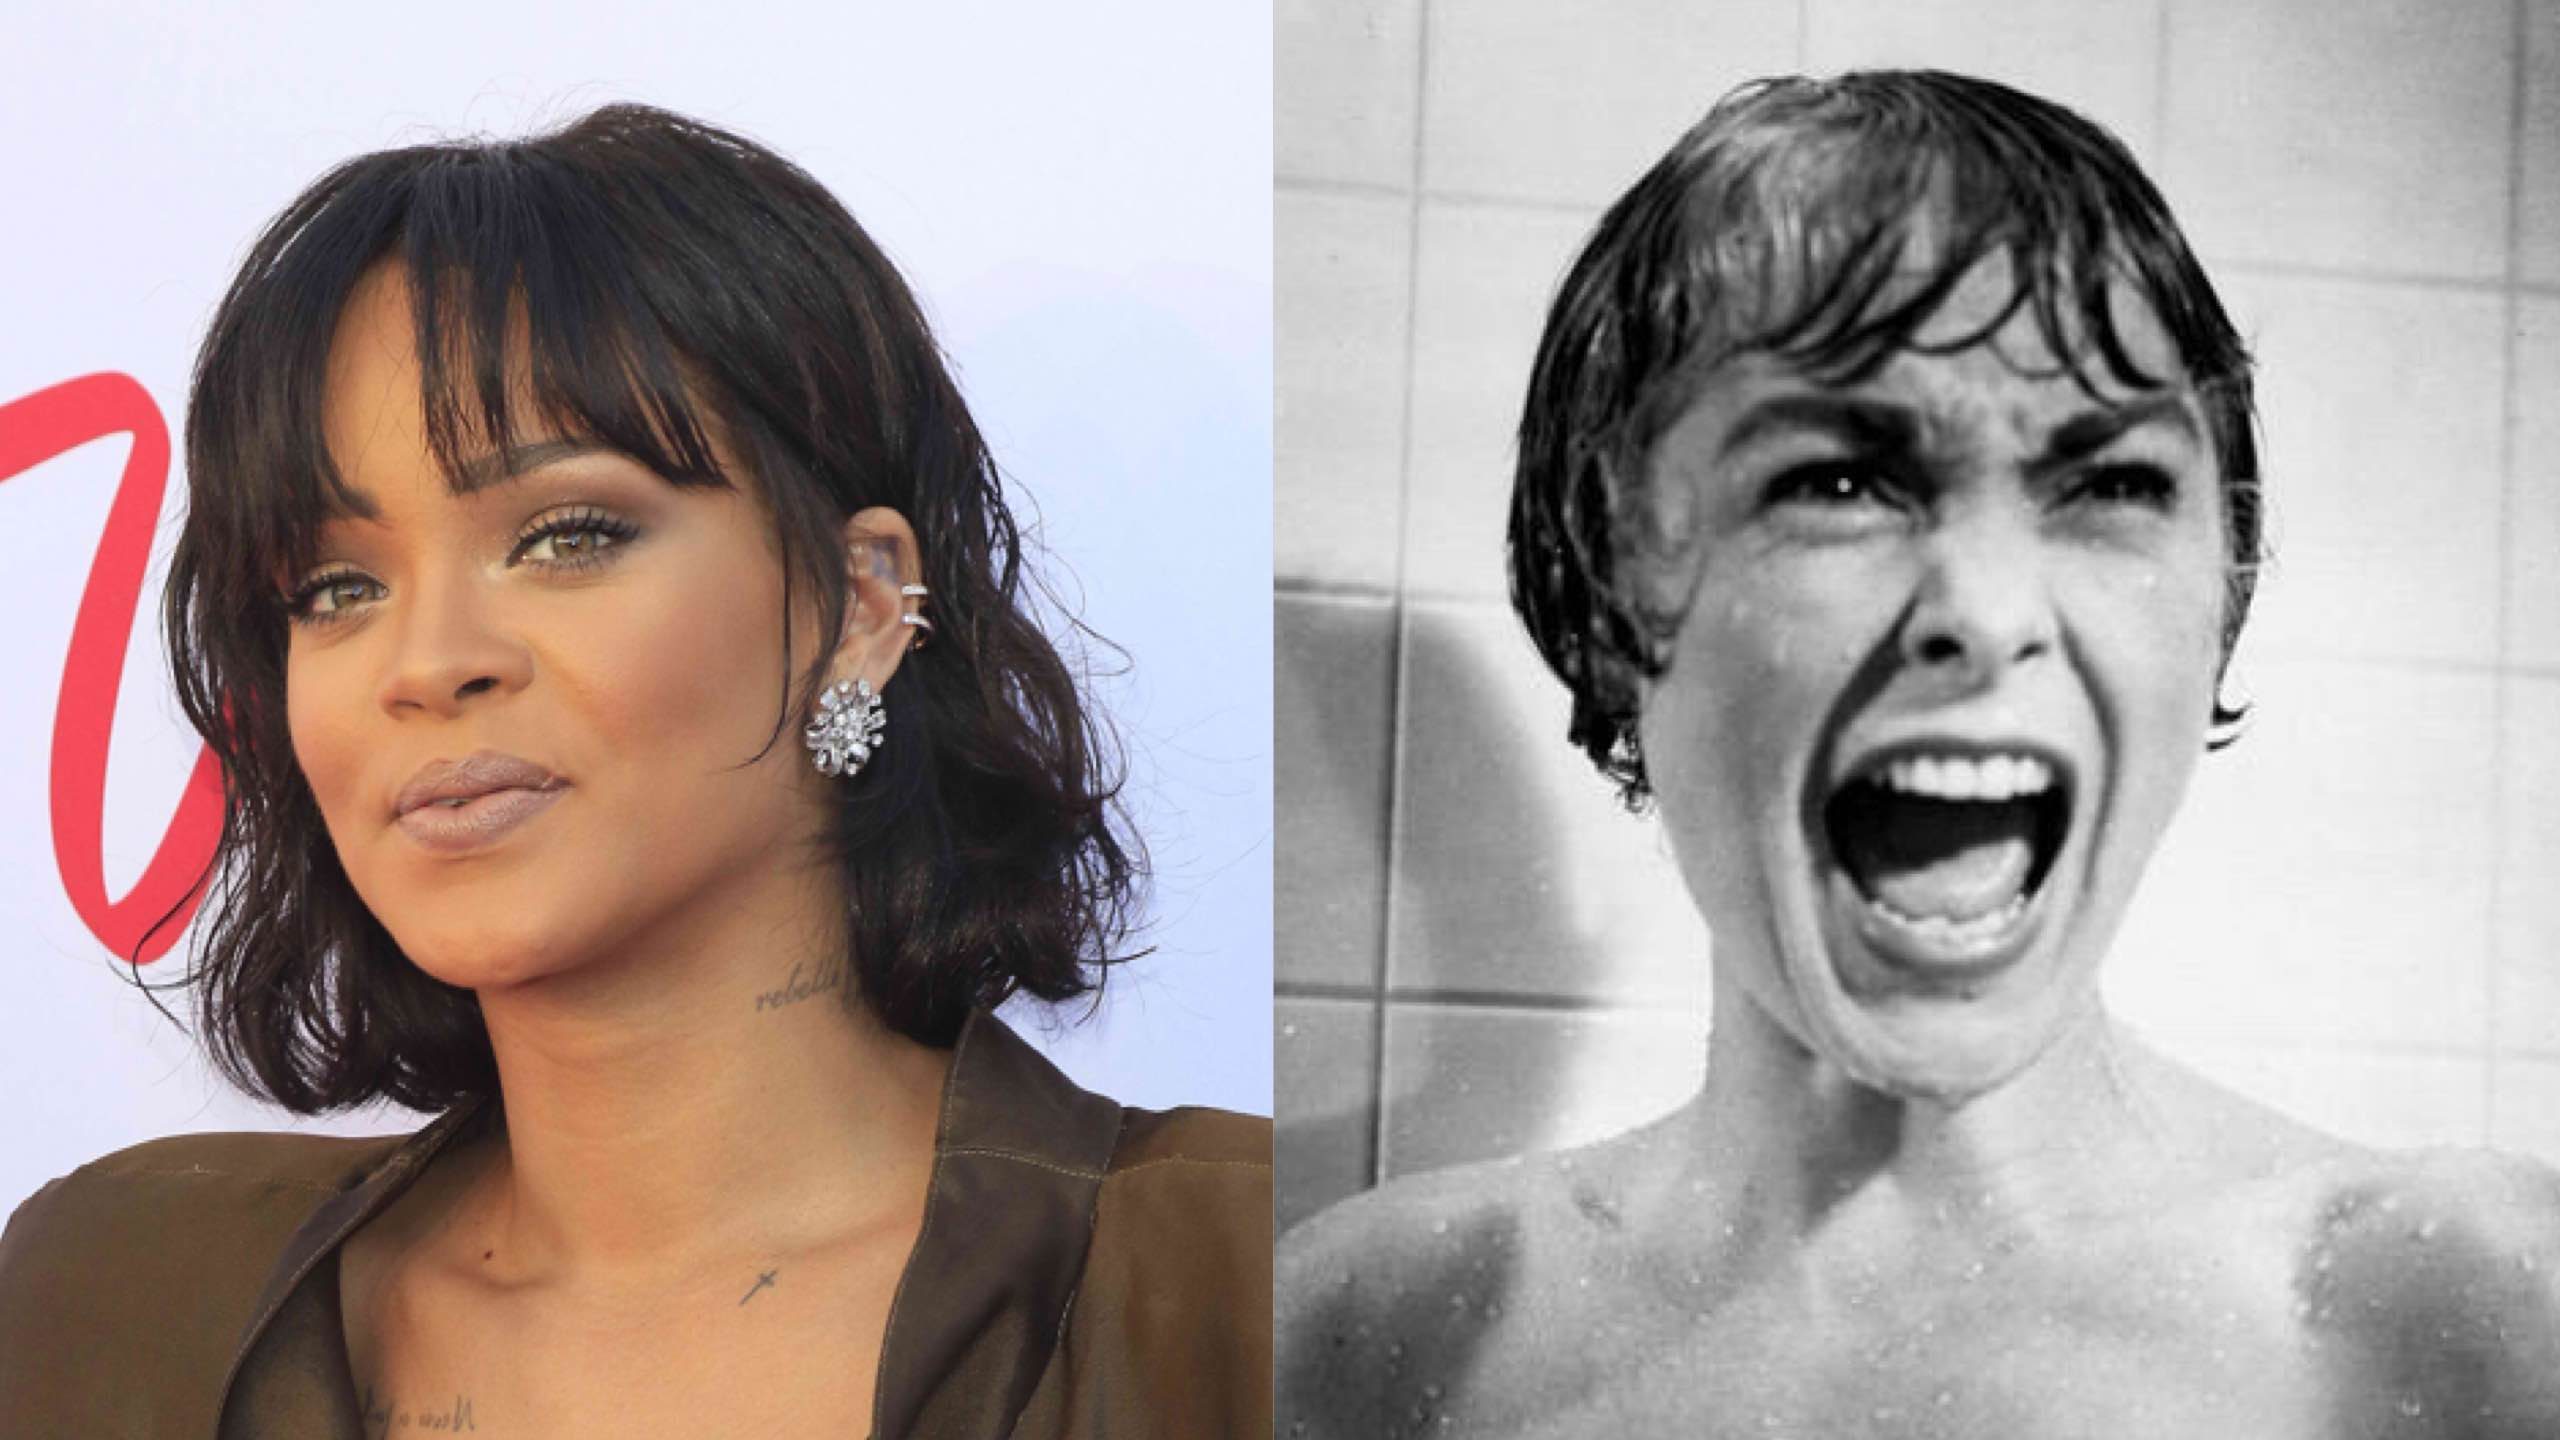 ‘Bates Motel’ casts Rihanna in Janet Leigh role